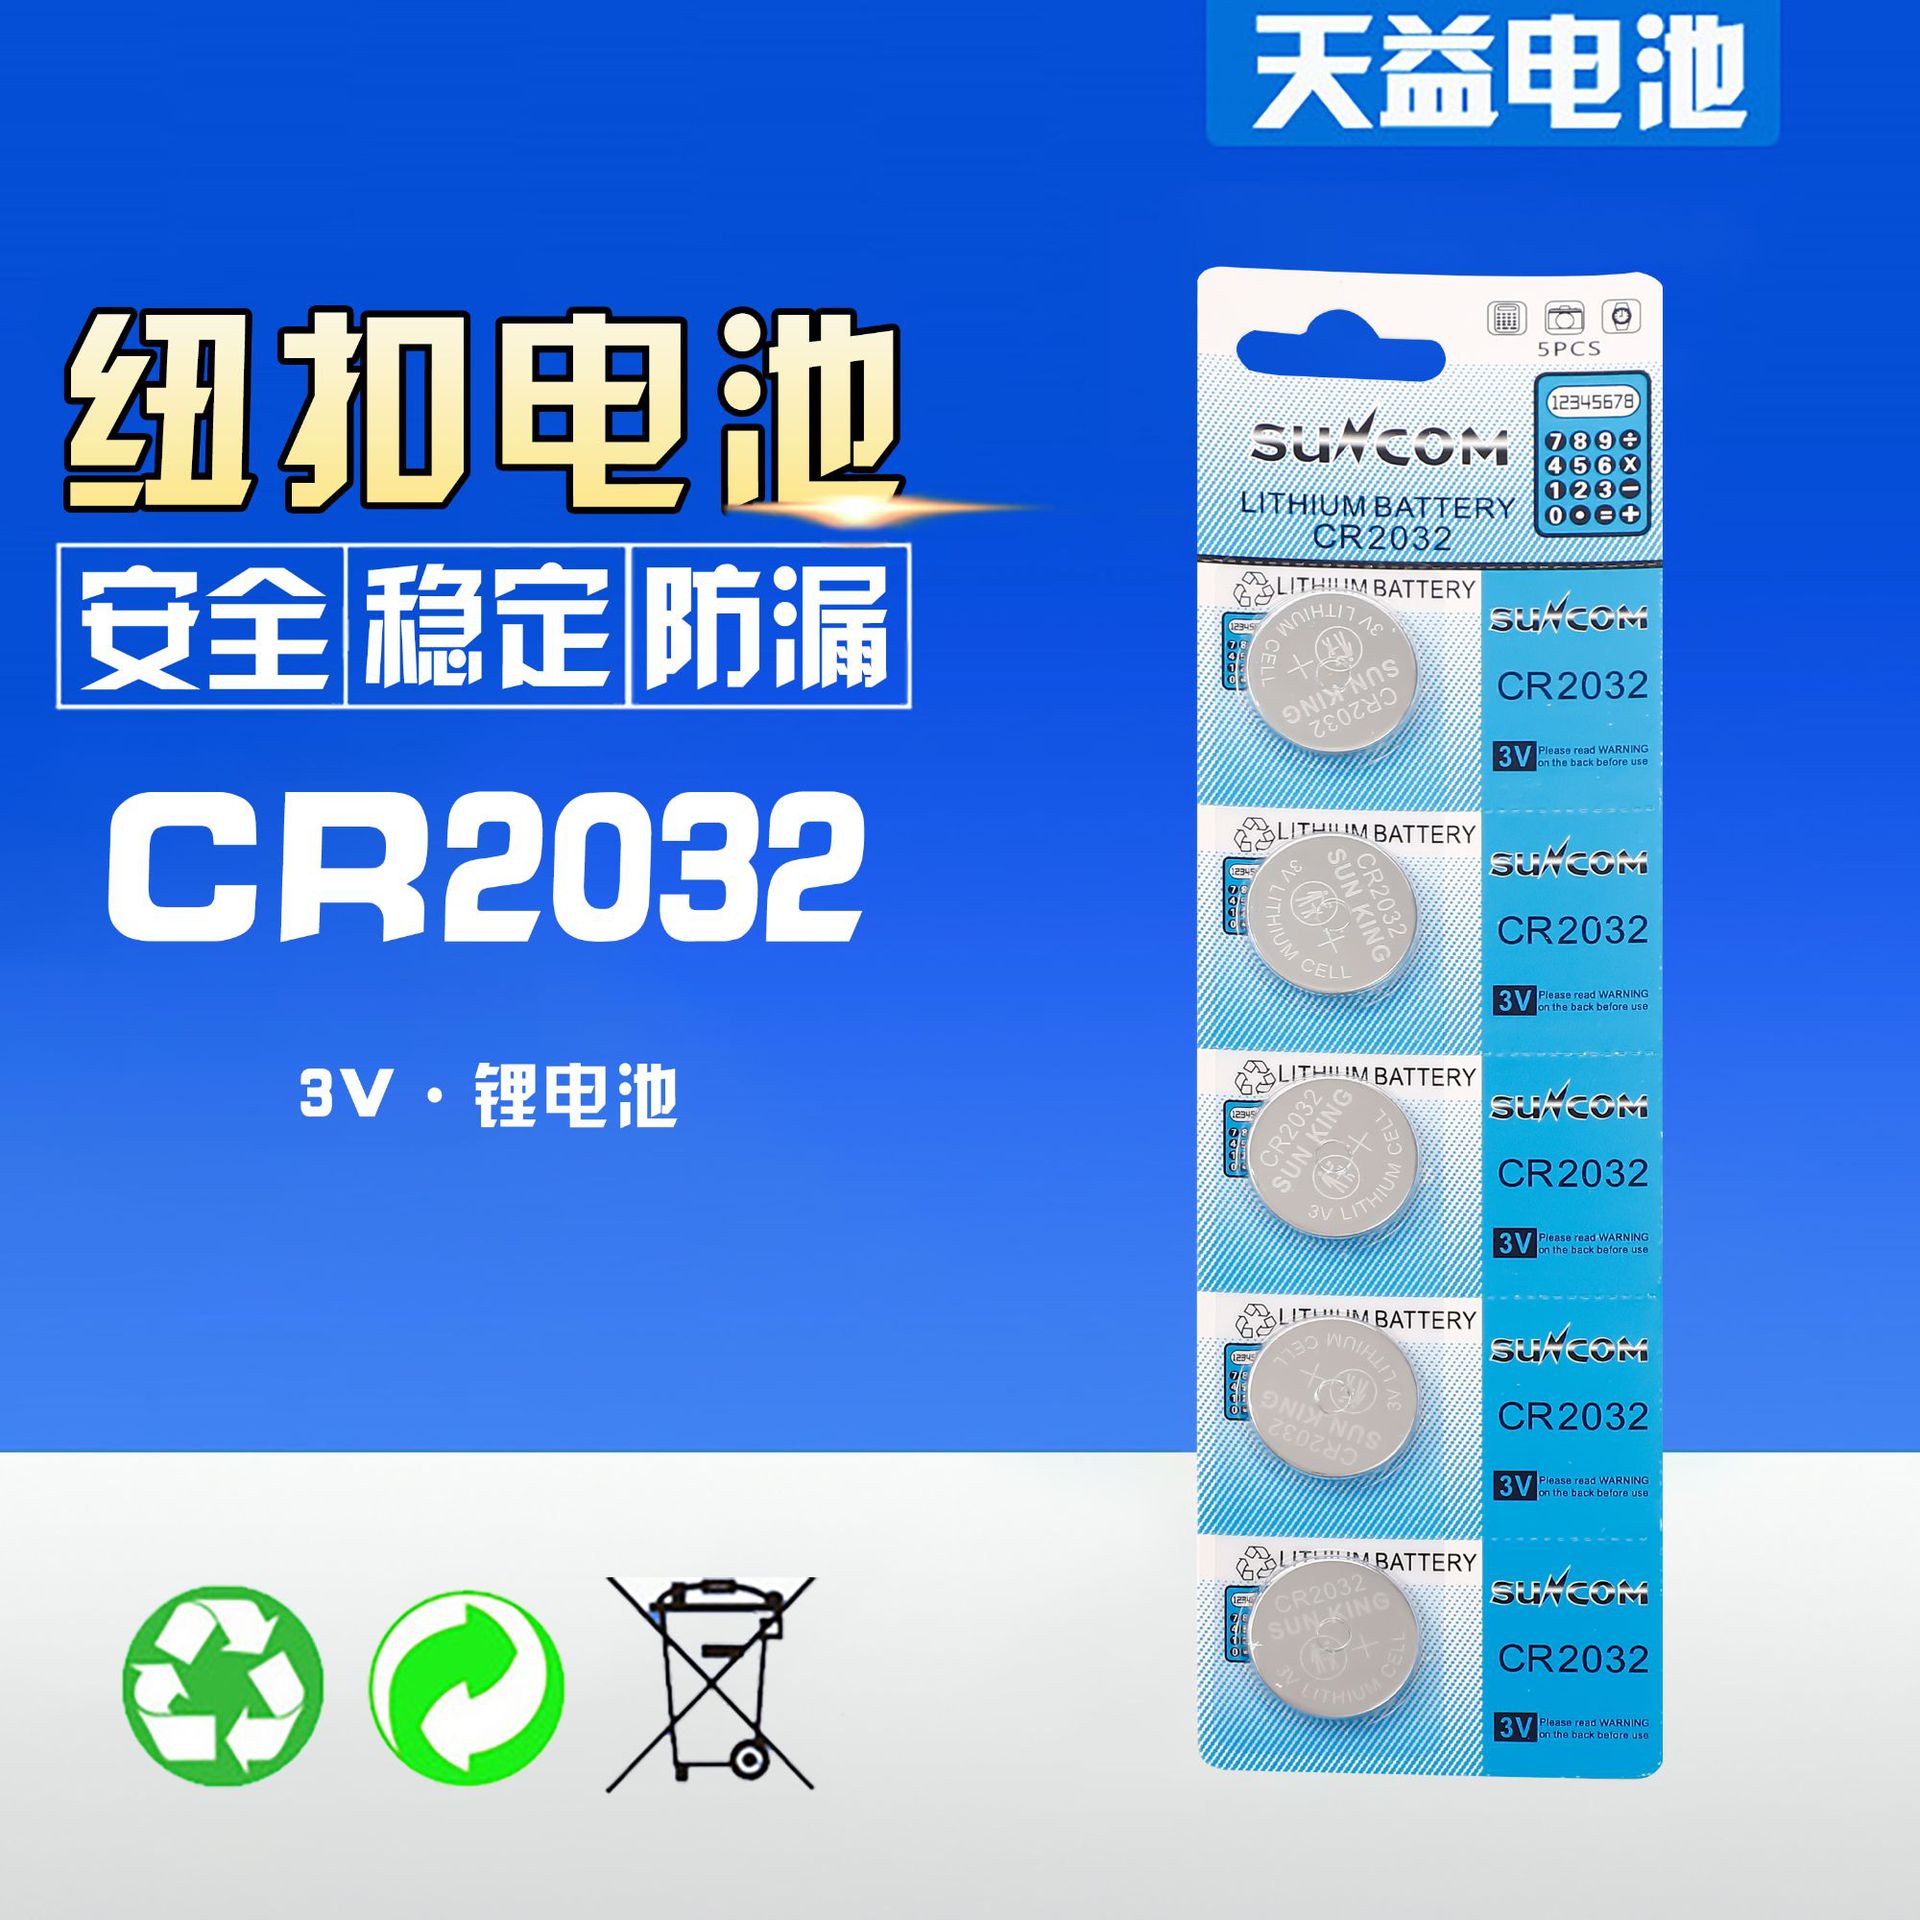 Xinguang Battery CR2032 Button Car Electronic Remote Controller Battery 3V Luminous Product Battery